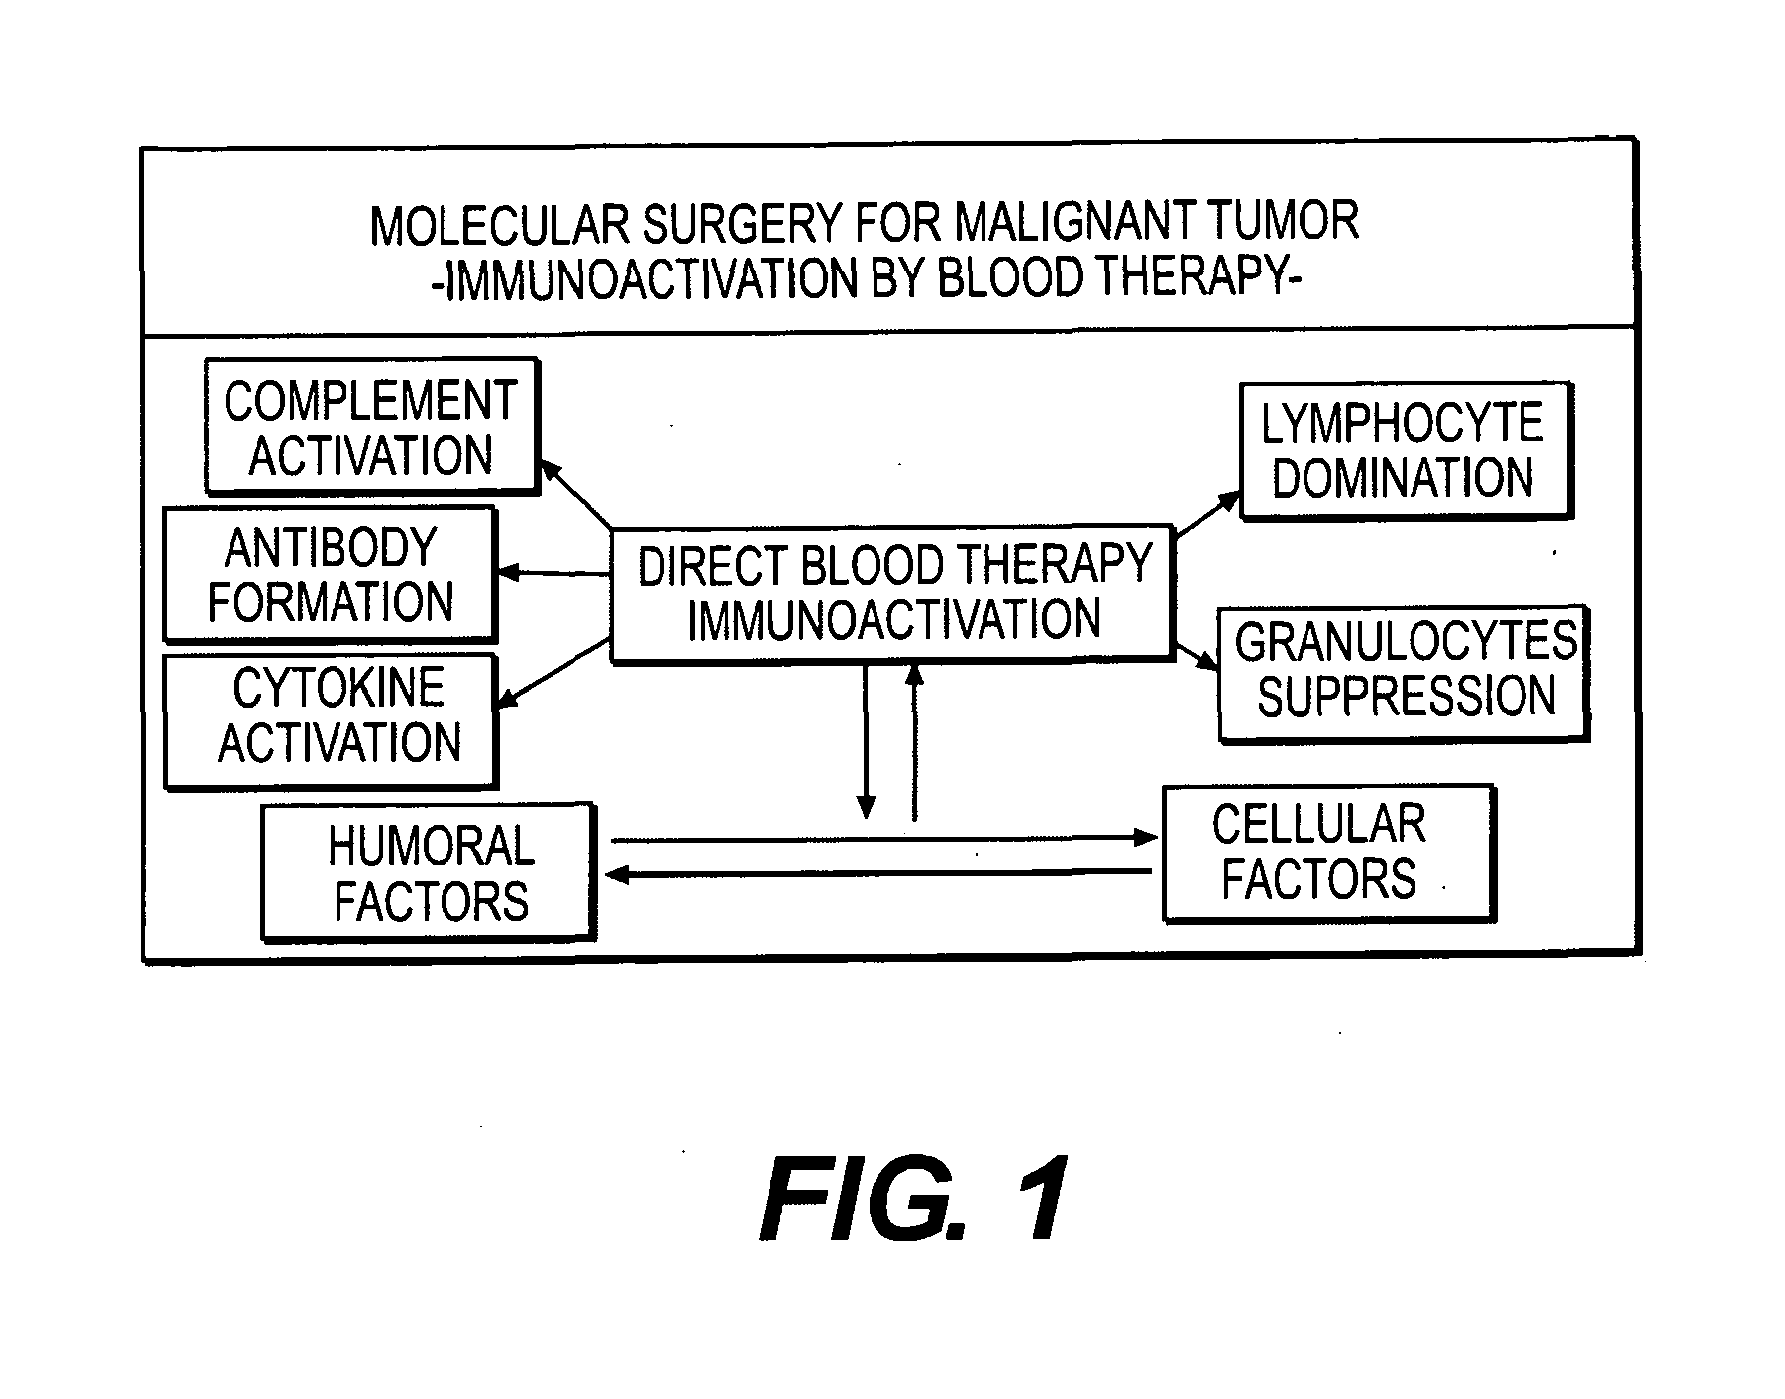 Immunoactivation blood perfusion filter for the treatment of malignant tumors